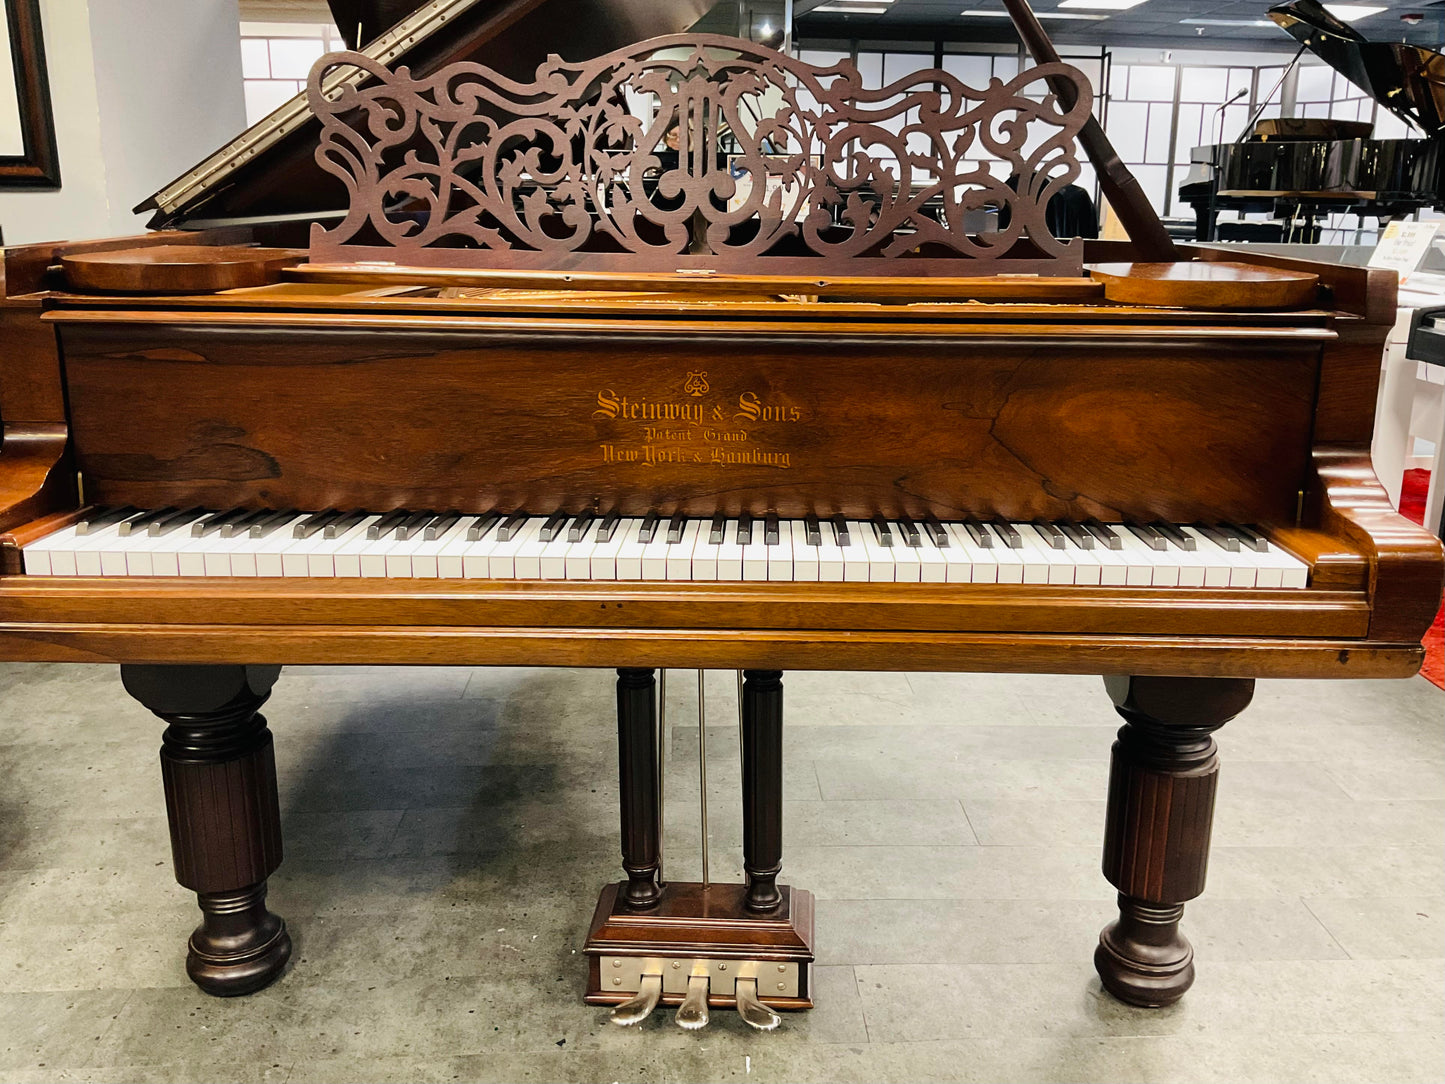 Pre-Owned Grand Steinway Model B - 1896 Edition (Rebuilt)